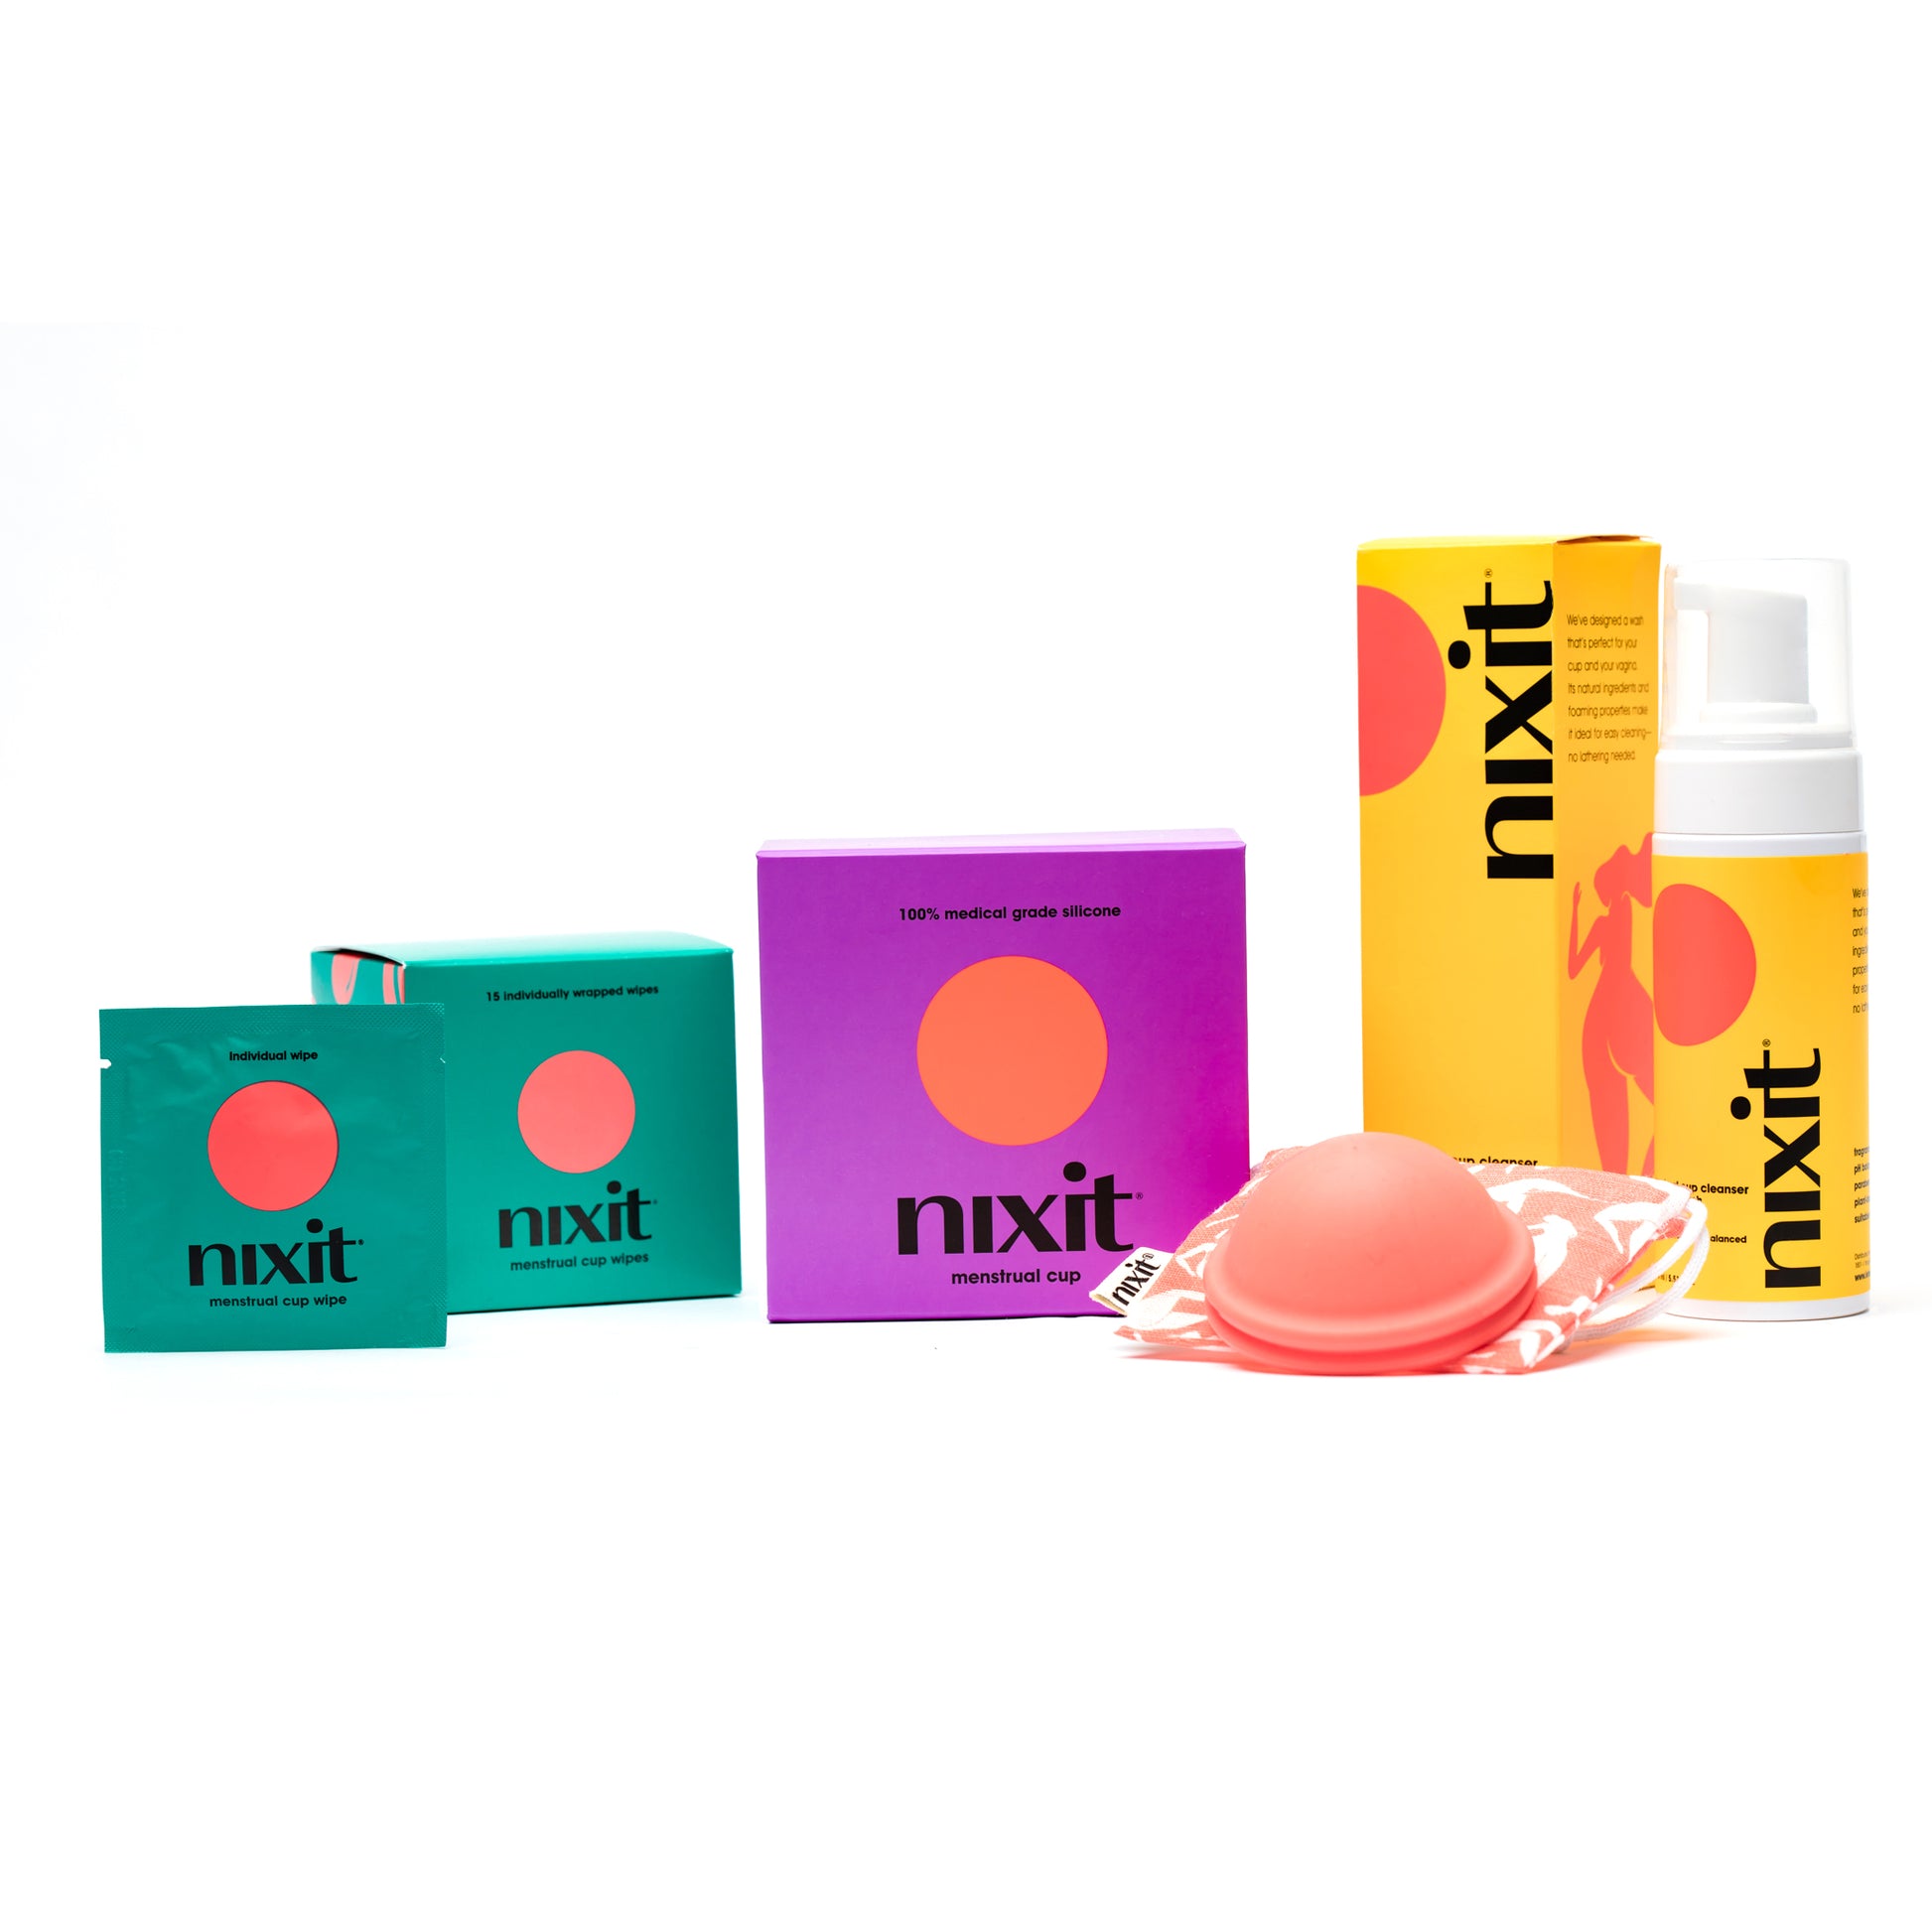 NIXIT - Menstrual Cup - 100% Med Grade Silicone - Sealed box comes